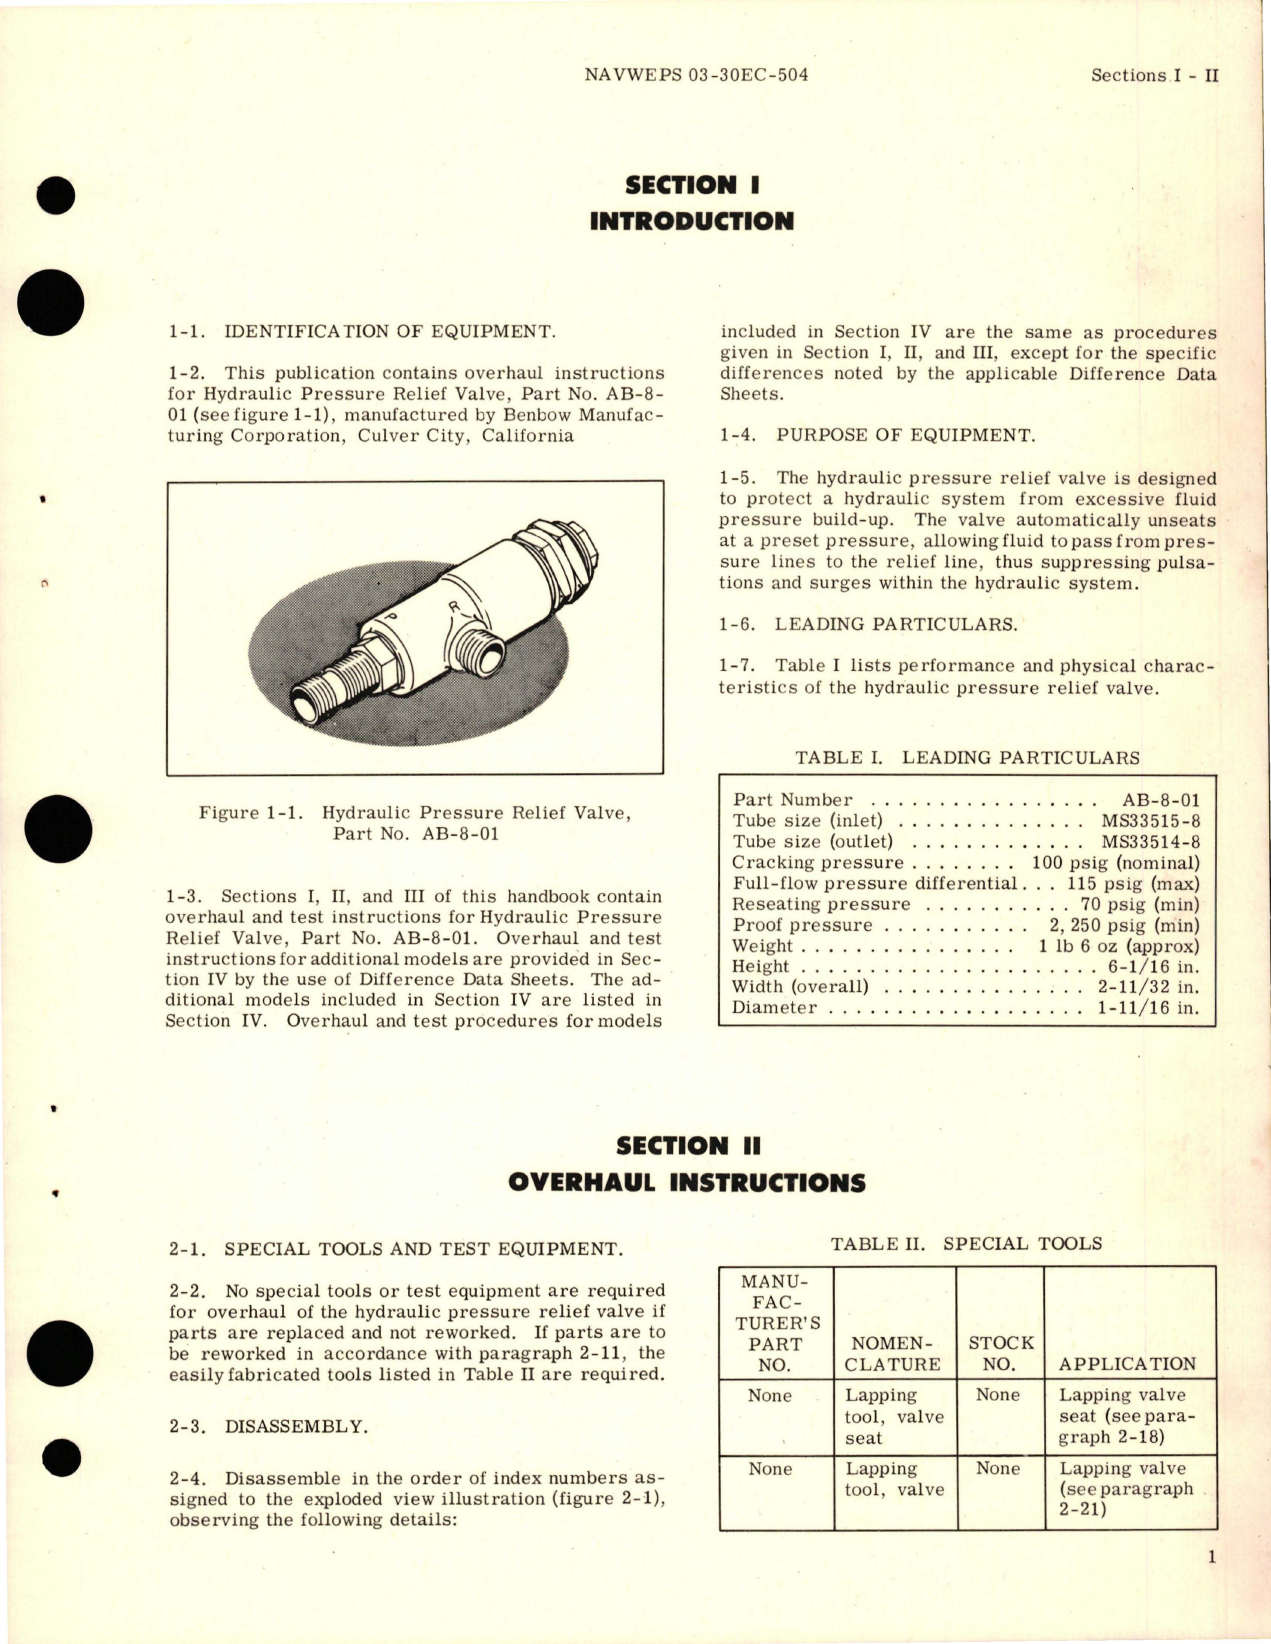 Sample page 5 from AirCorps Library document: Overhaul Instructions for Hydraulic Pressure Relief Valves - Parts AB-8-01, AB-8-02, AB-8-02A, AB-8-03, and AB-68-04 